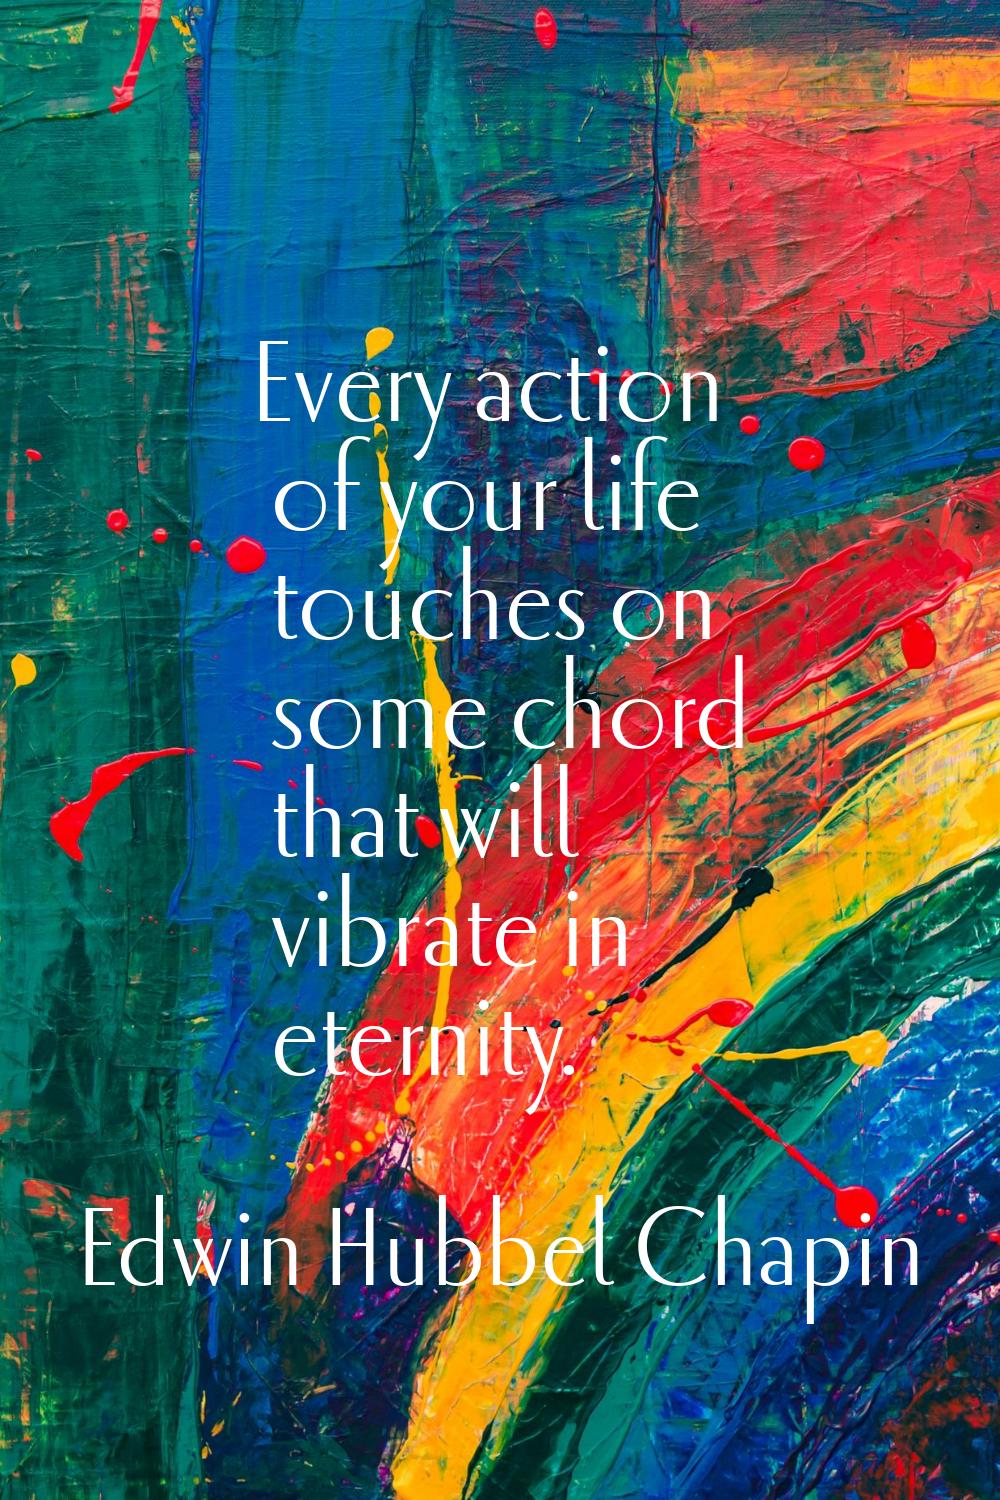 Every action of your life touches on some chord that will vibrate in eternity.